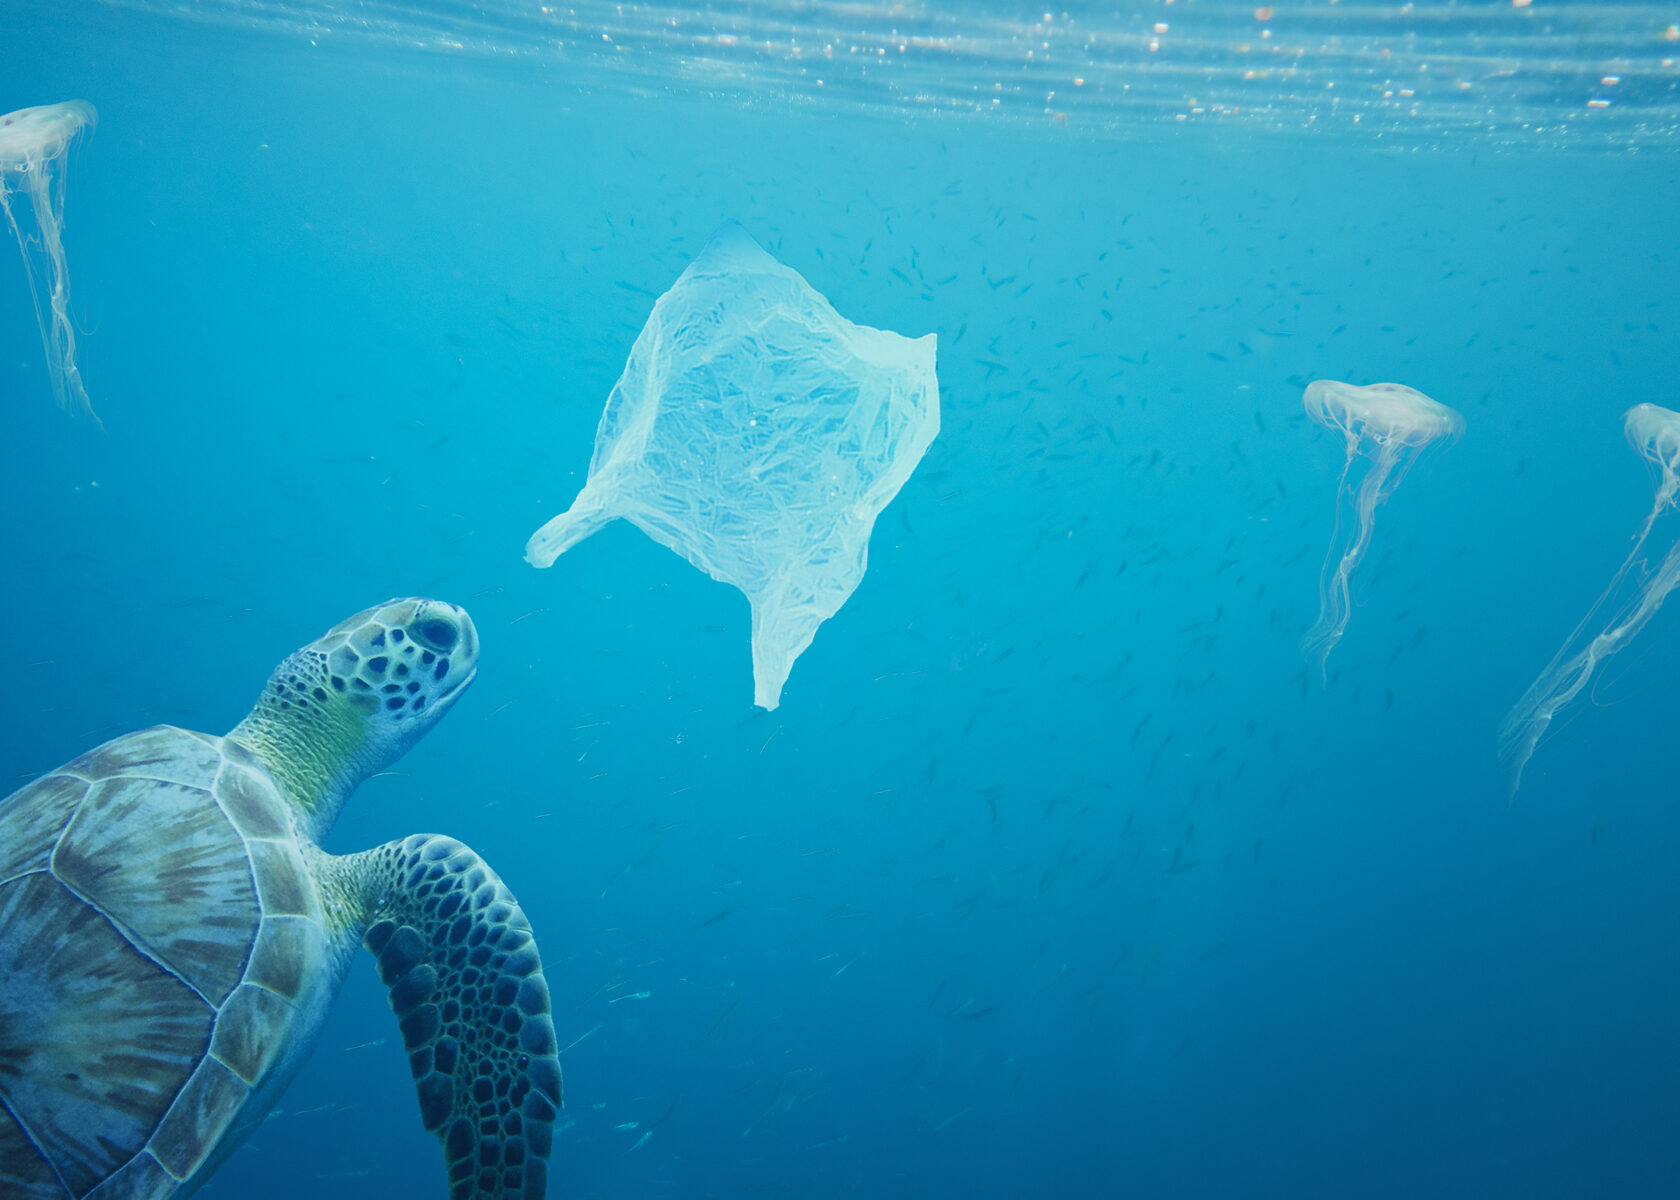 A turtle swims behind a plastic bag under the ocean